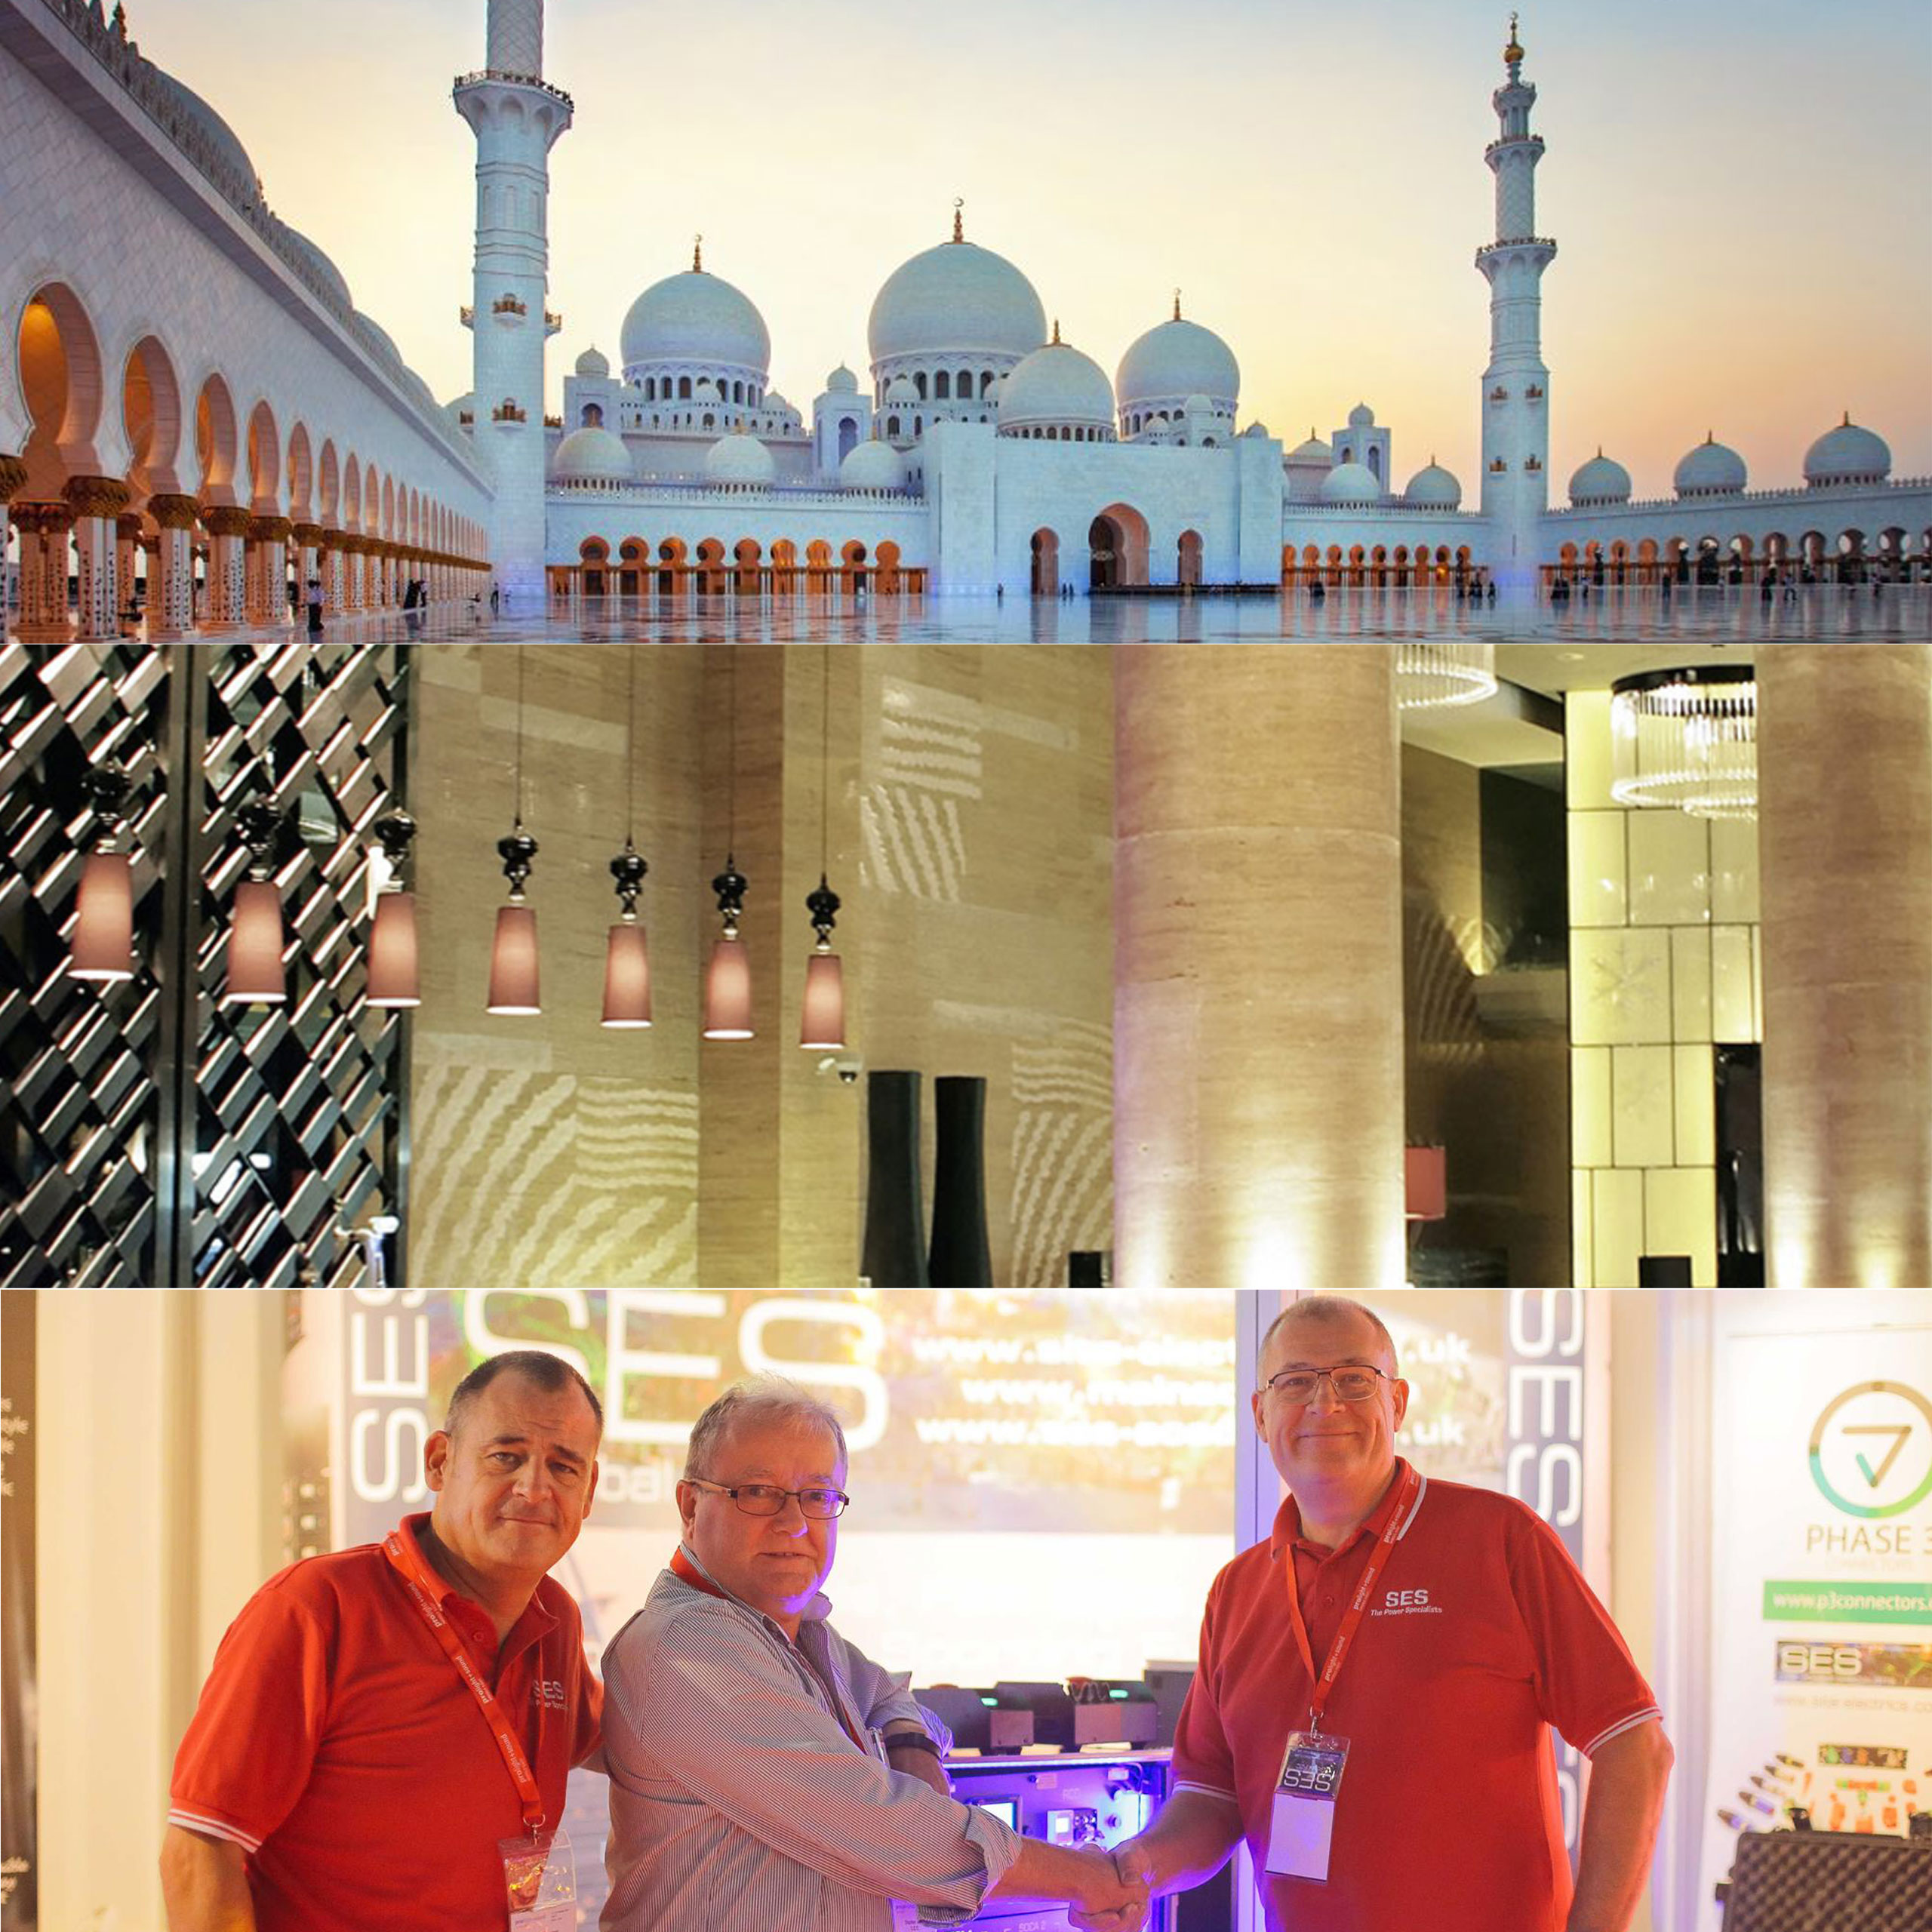 Prolight + Sound Middle East 2018 exhibitors shine spotlight on high-end regional projects and case studies